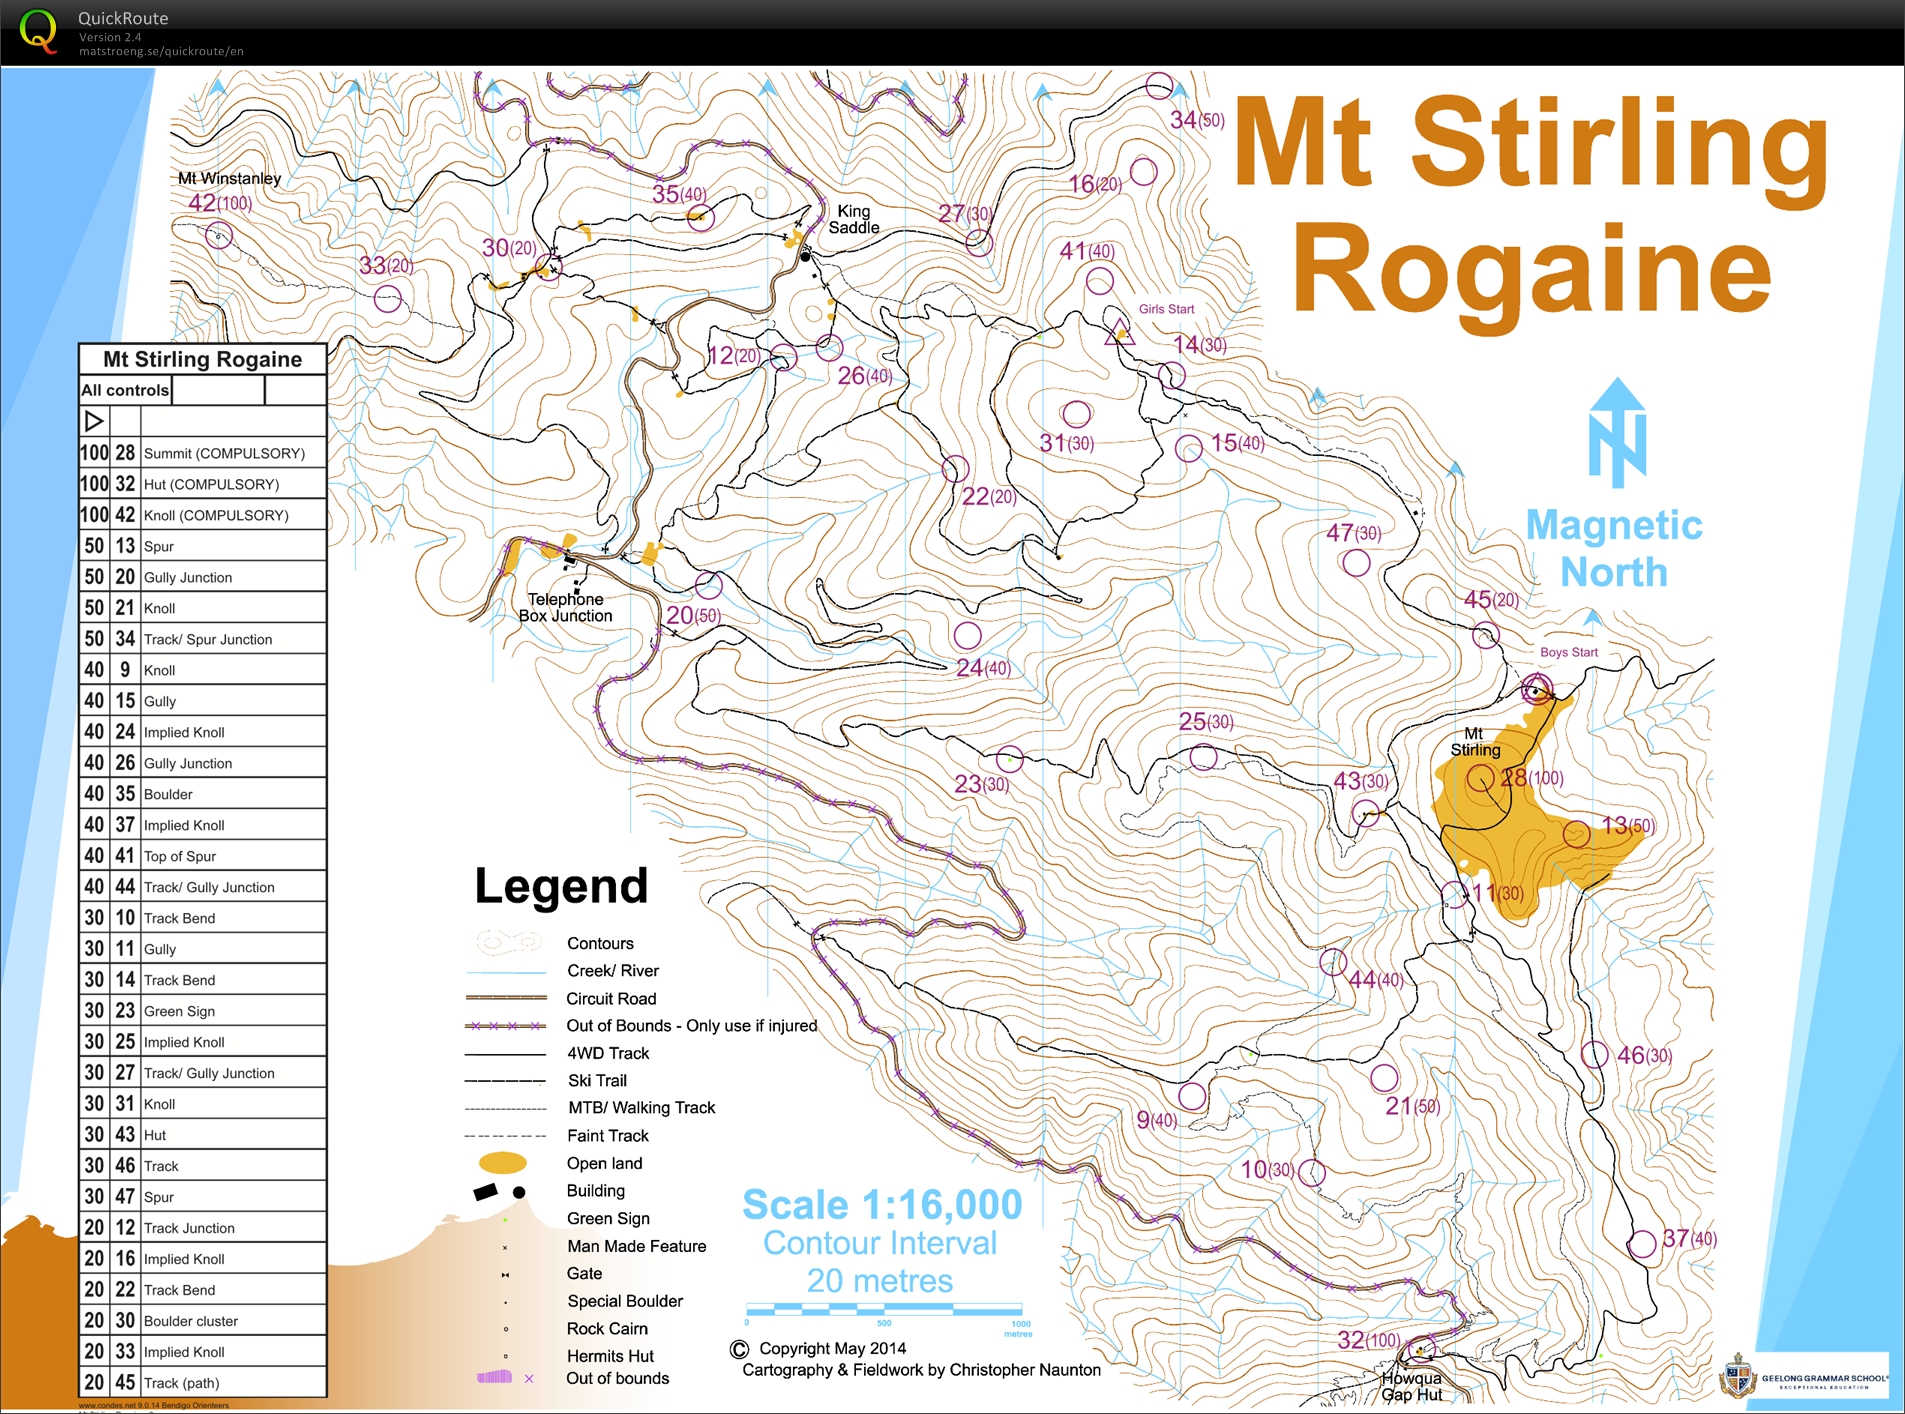 Mt Stirling Rogaine - Ross and Kat's run (05.11.2014)